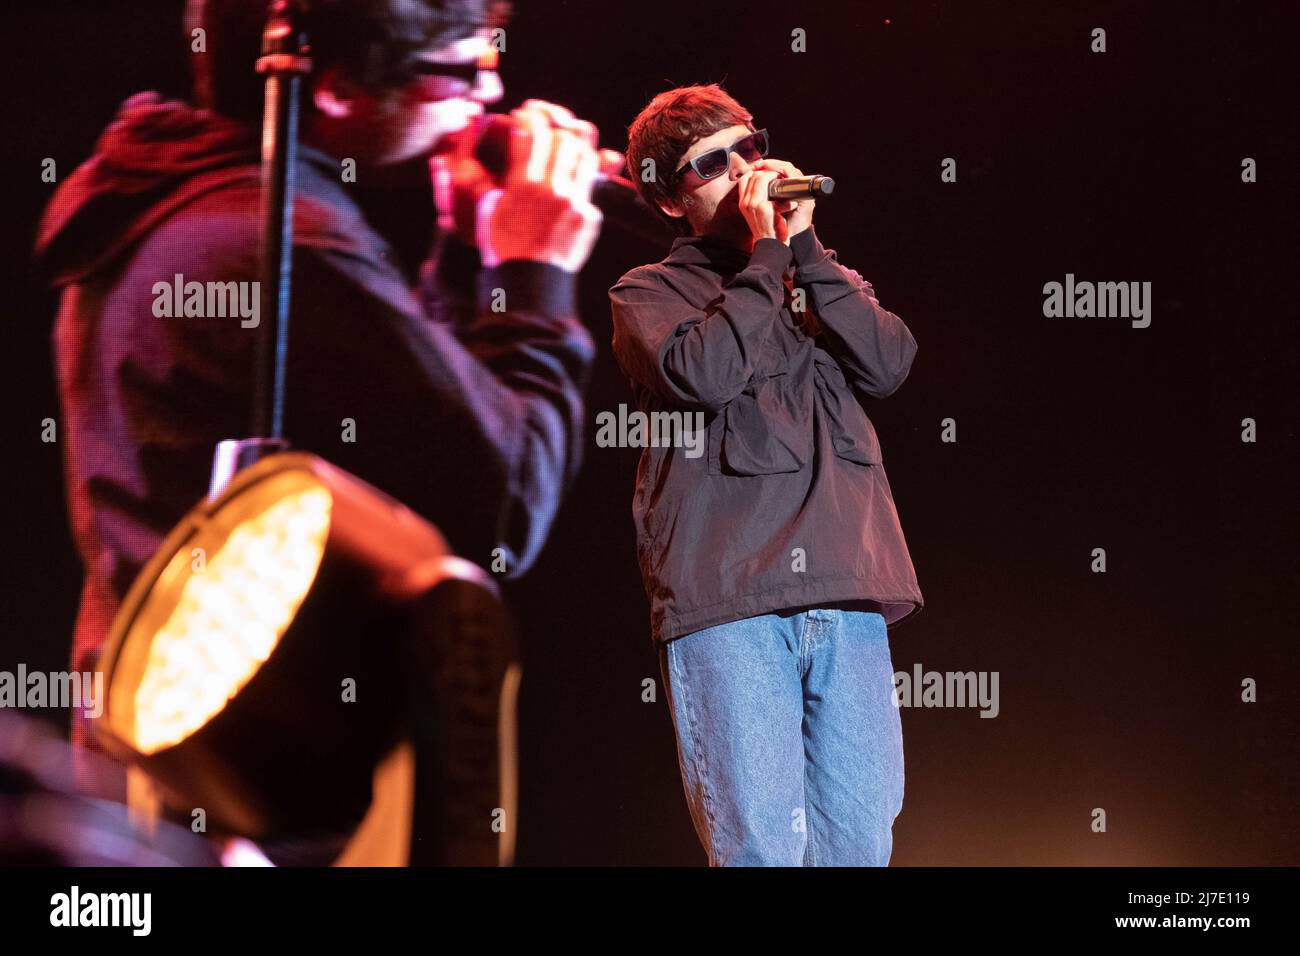 Mantua, Italy. 08 May, 2022. Picture shows Gazzelle Italian singer during the performs at Grana Padano Arena Credit: Roberto Tommasini/Alamy Live News Stock Photo